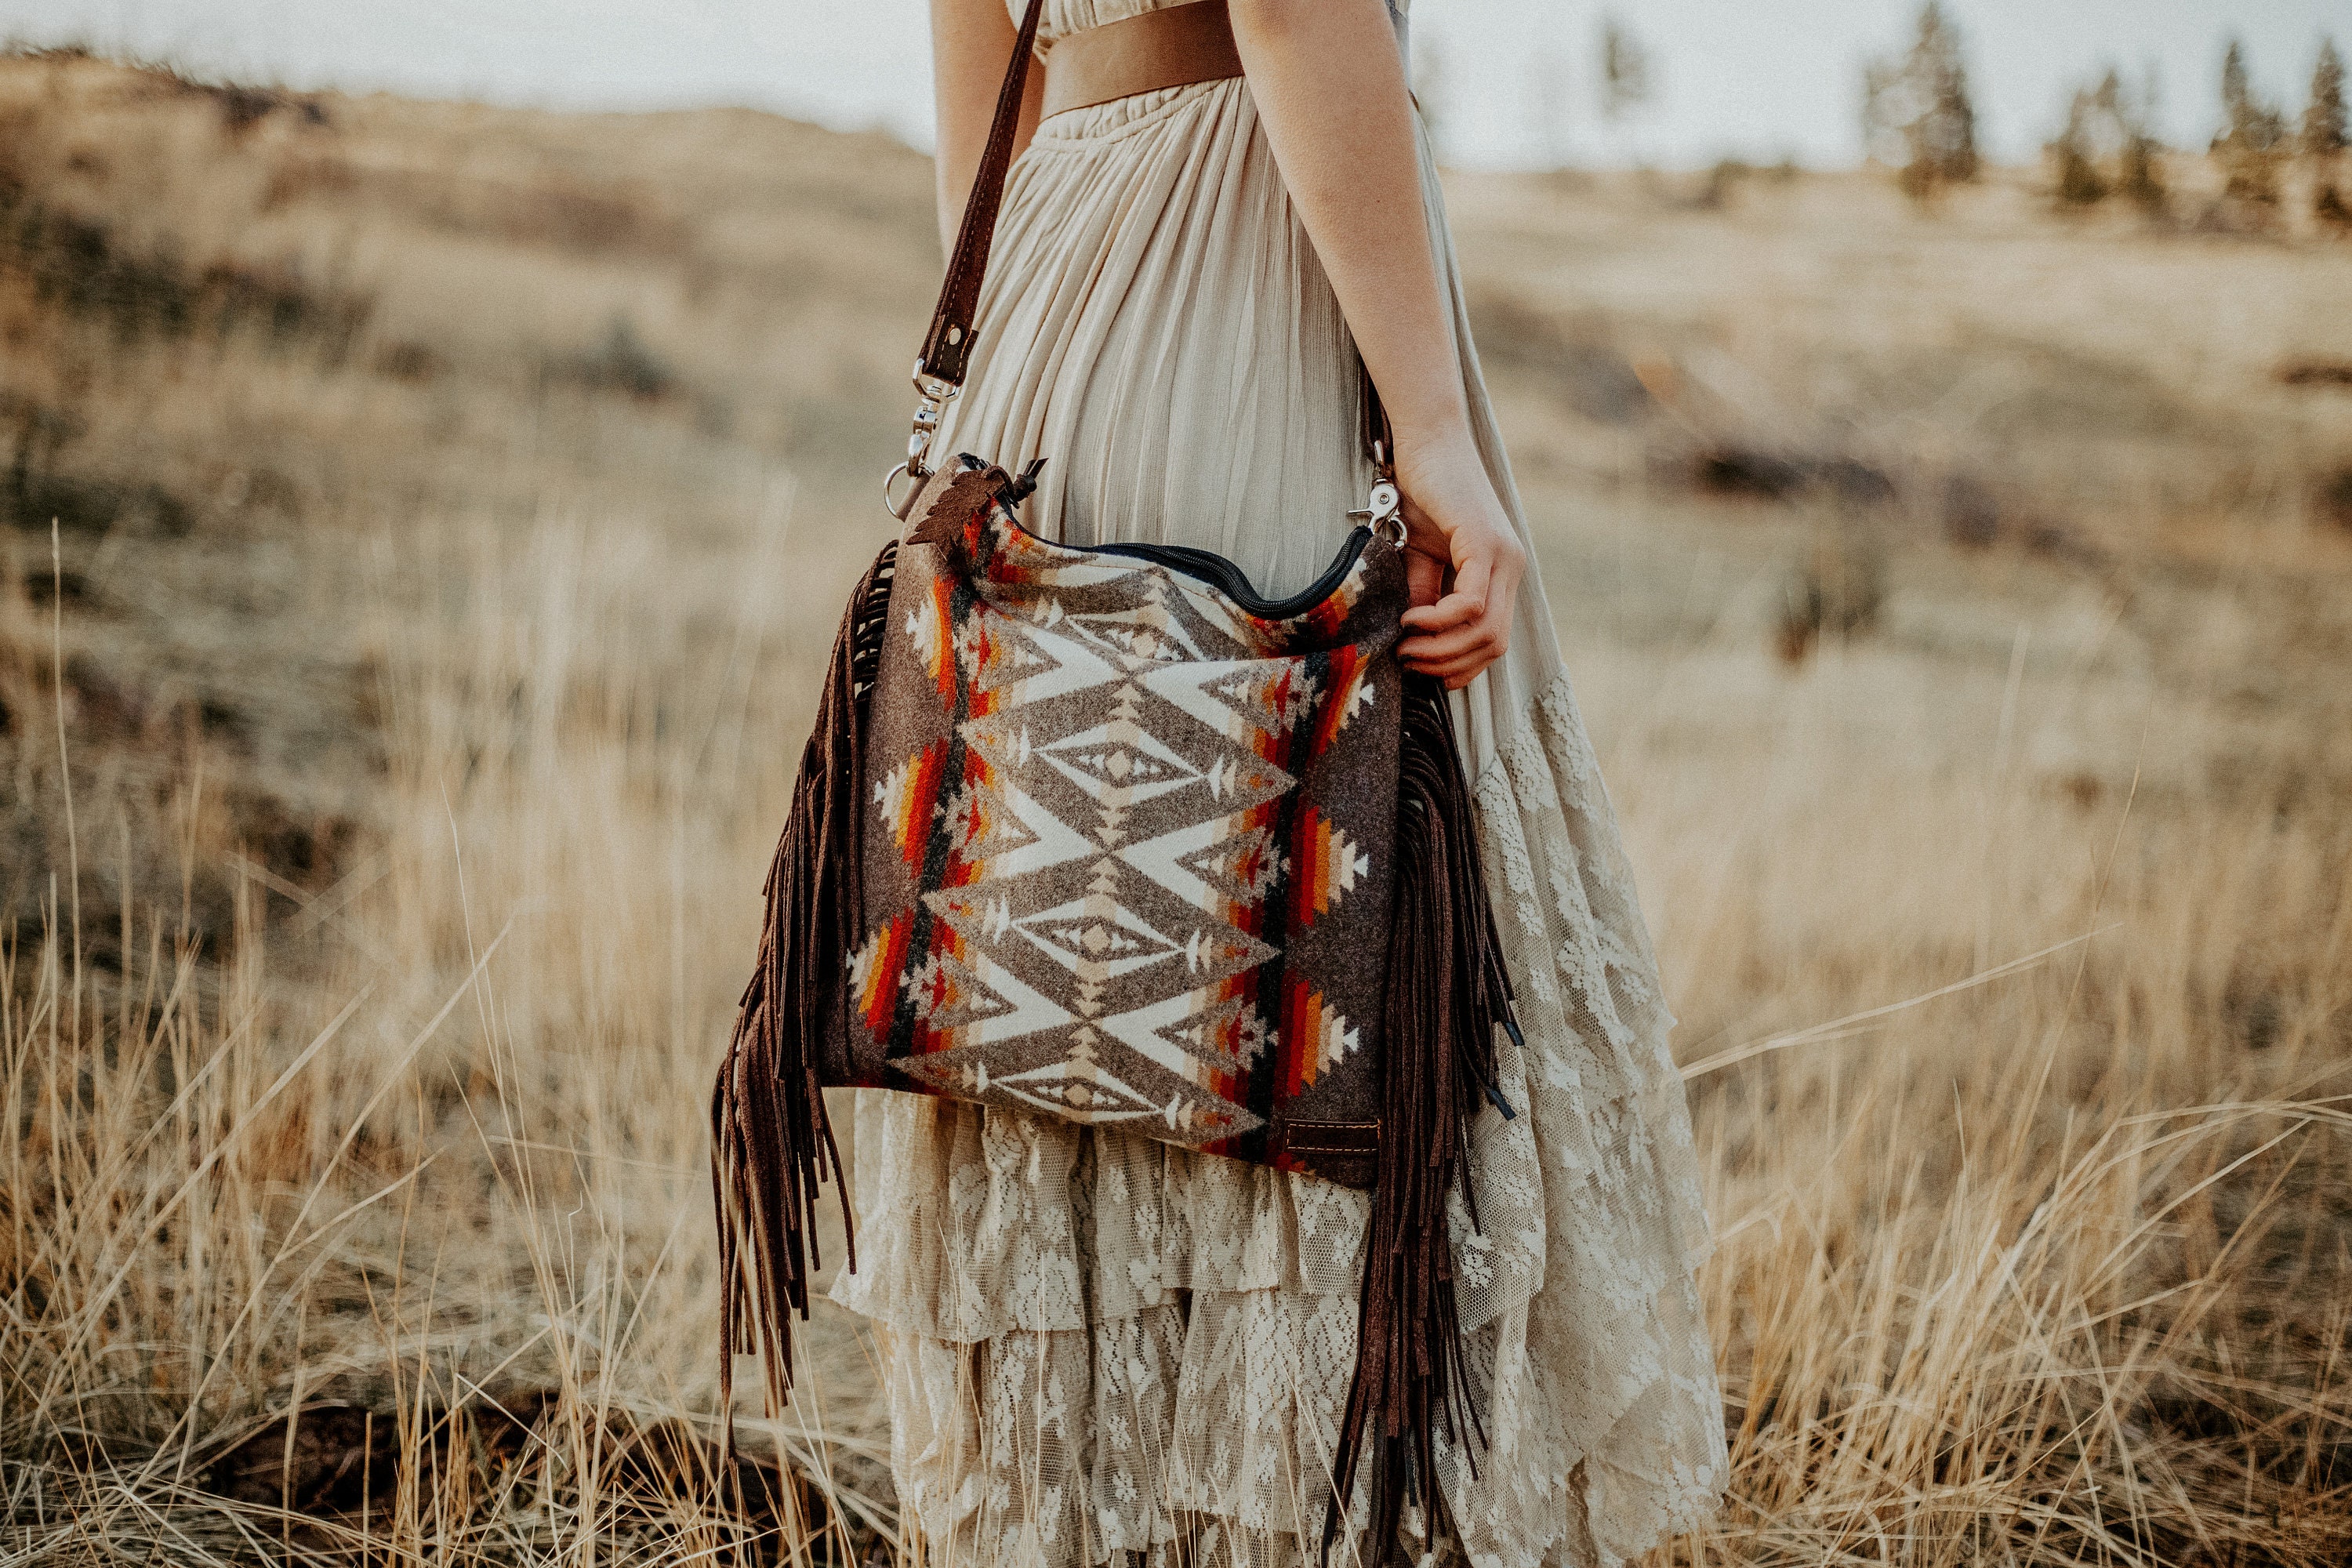 women western fashion  Western bags purses, Cowgirl accessories, Boho leather  bags